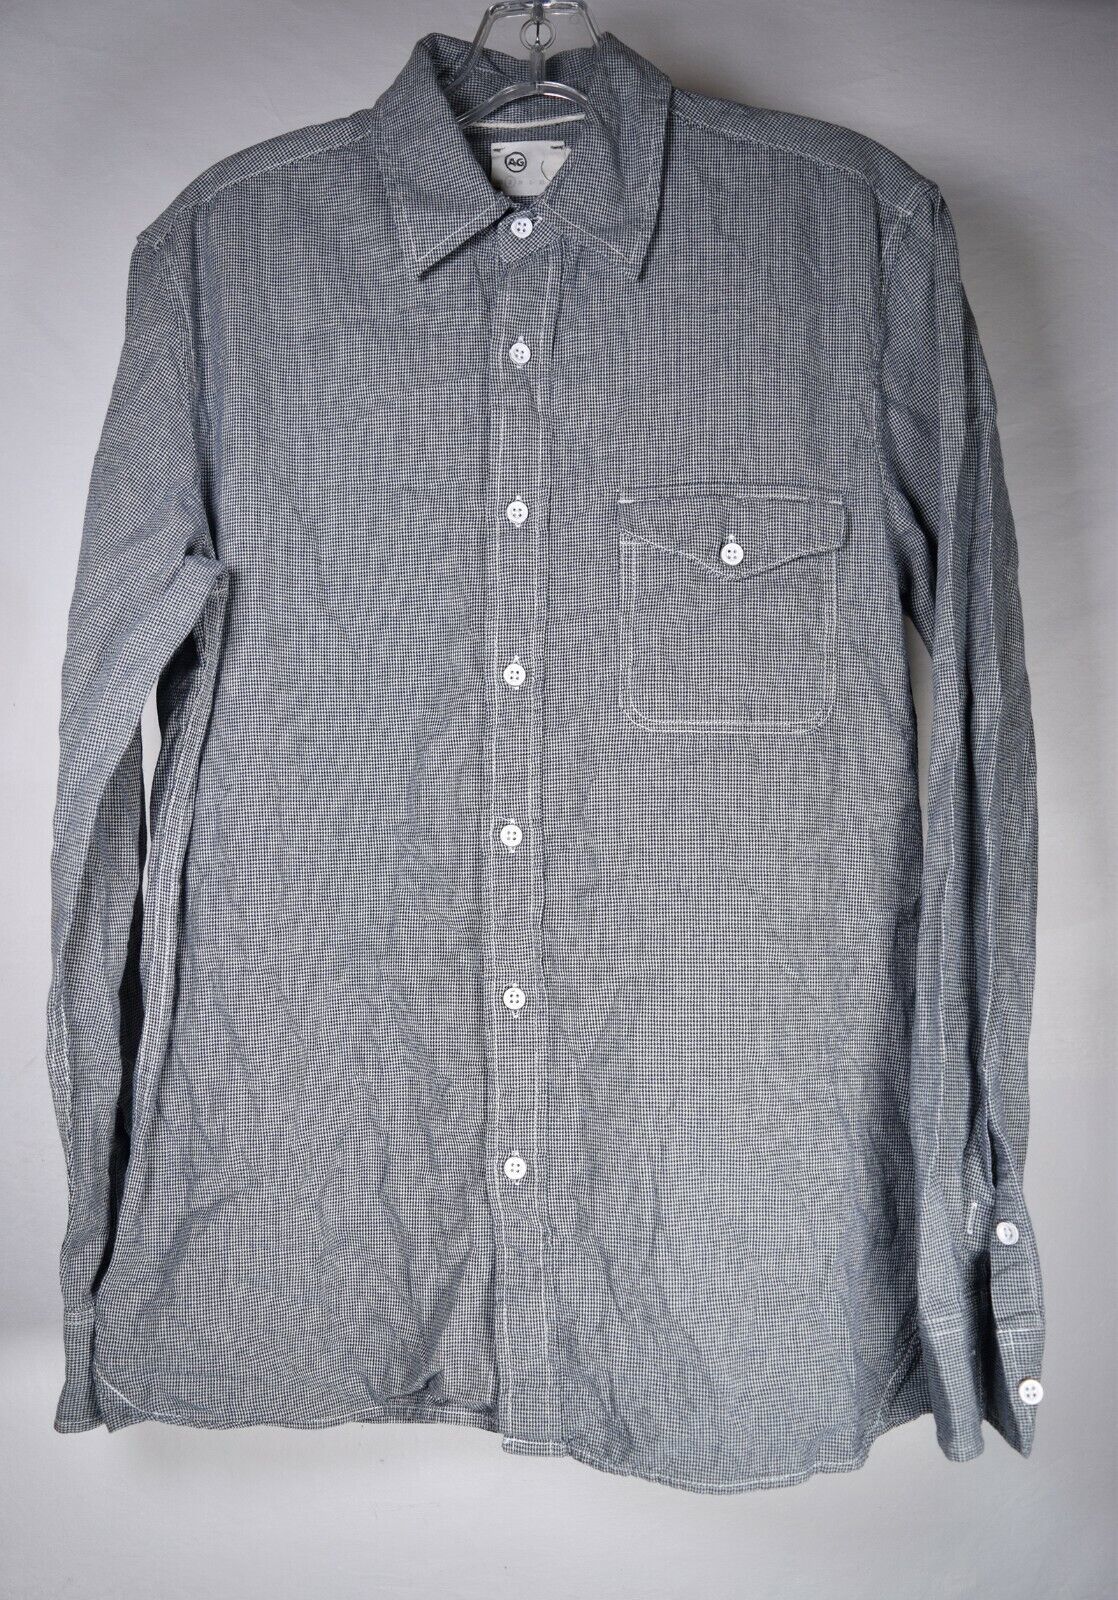 Primary image for AG Adriano Goldschmied Mens Shirt Herringbone Button Down LS Top S Gray